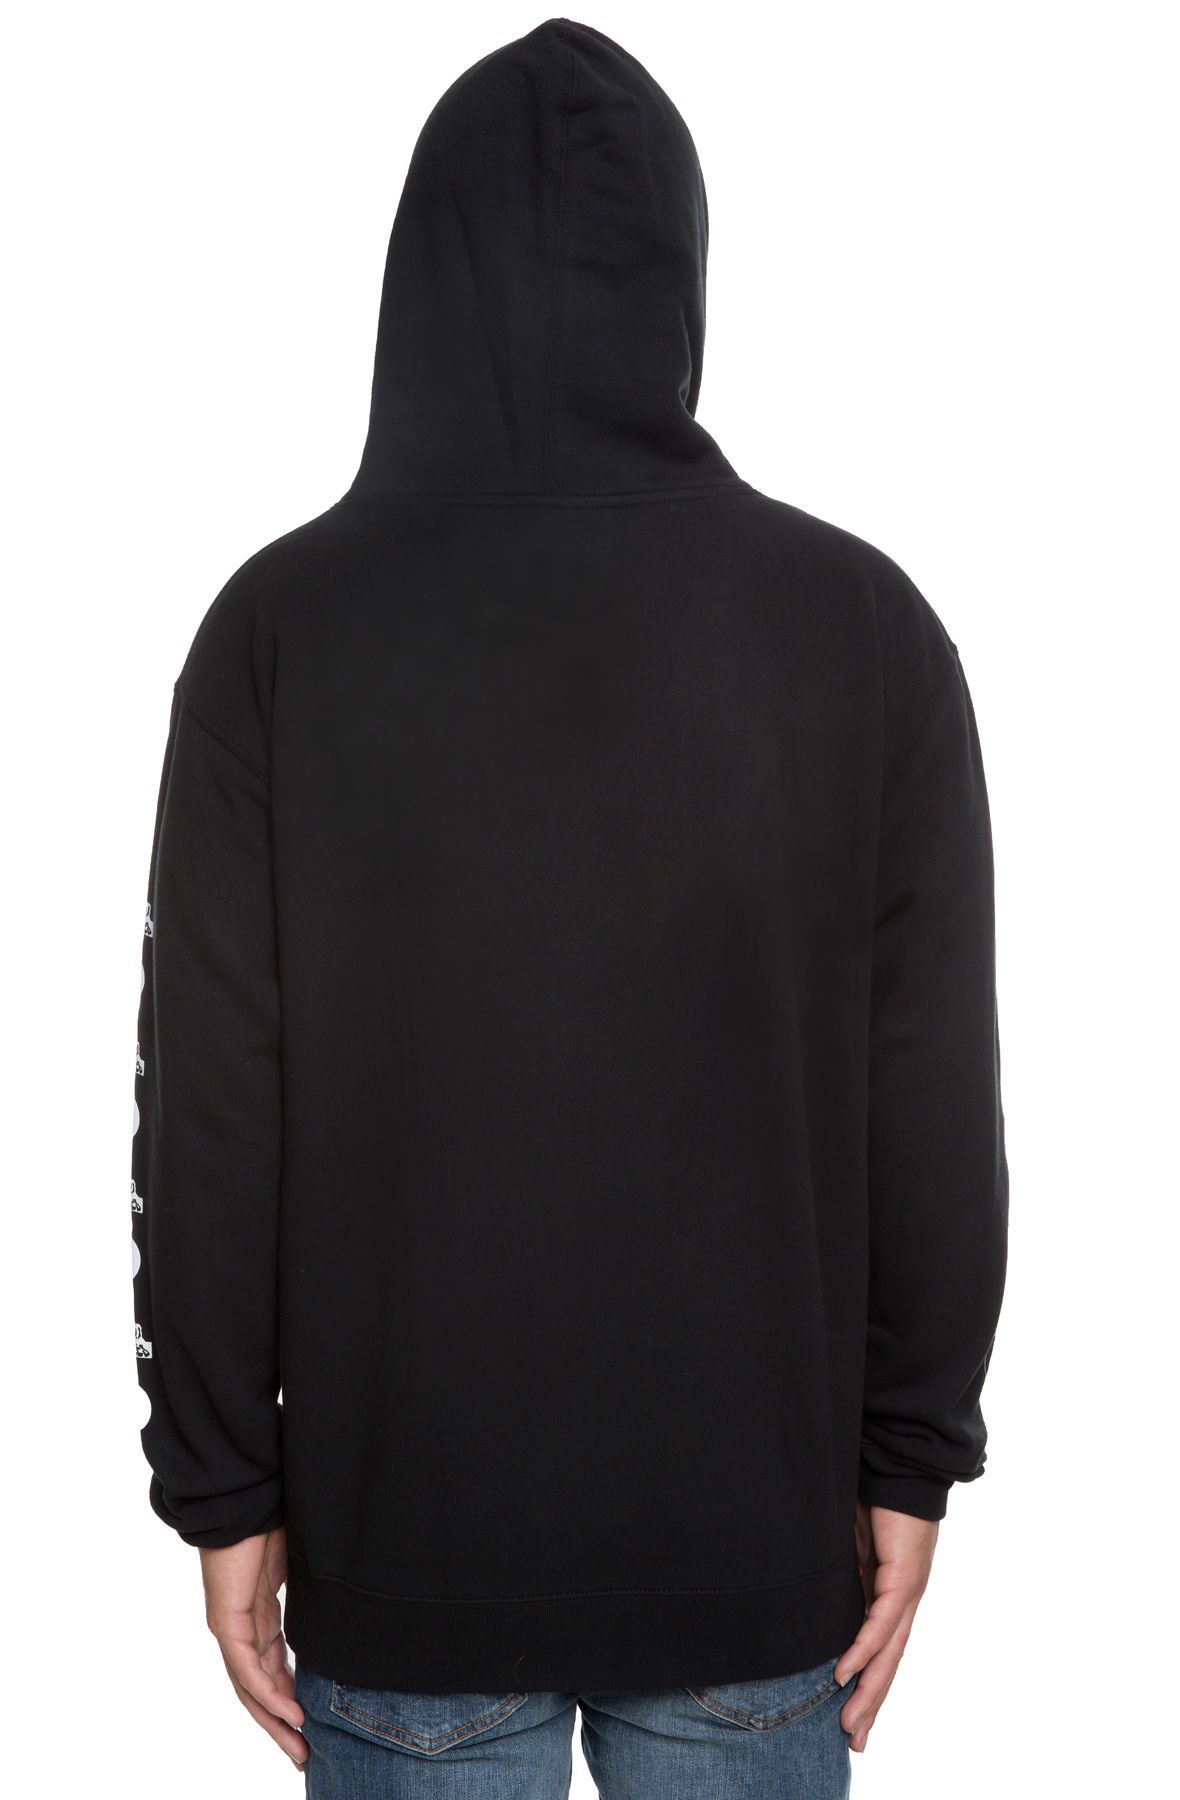 JUNGLES The Natural Relaxation Hoodie in H-NRT-BP-BLK - Shiekh